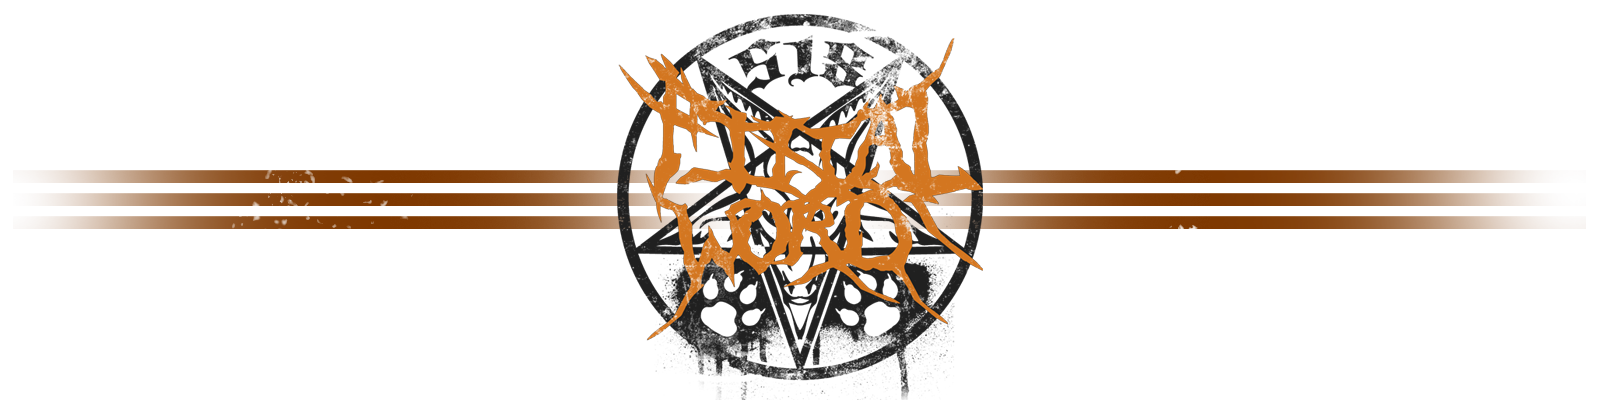 Final Word Records